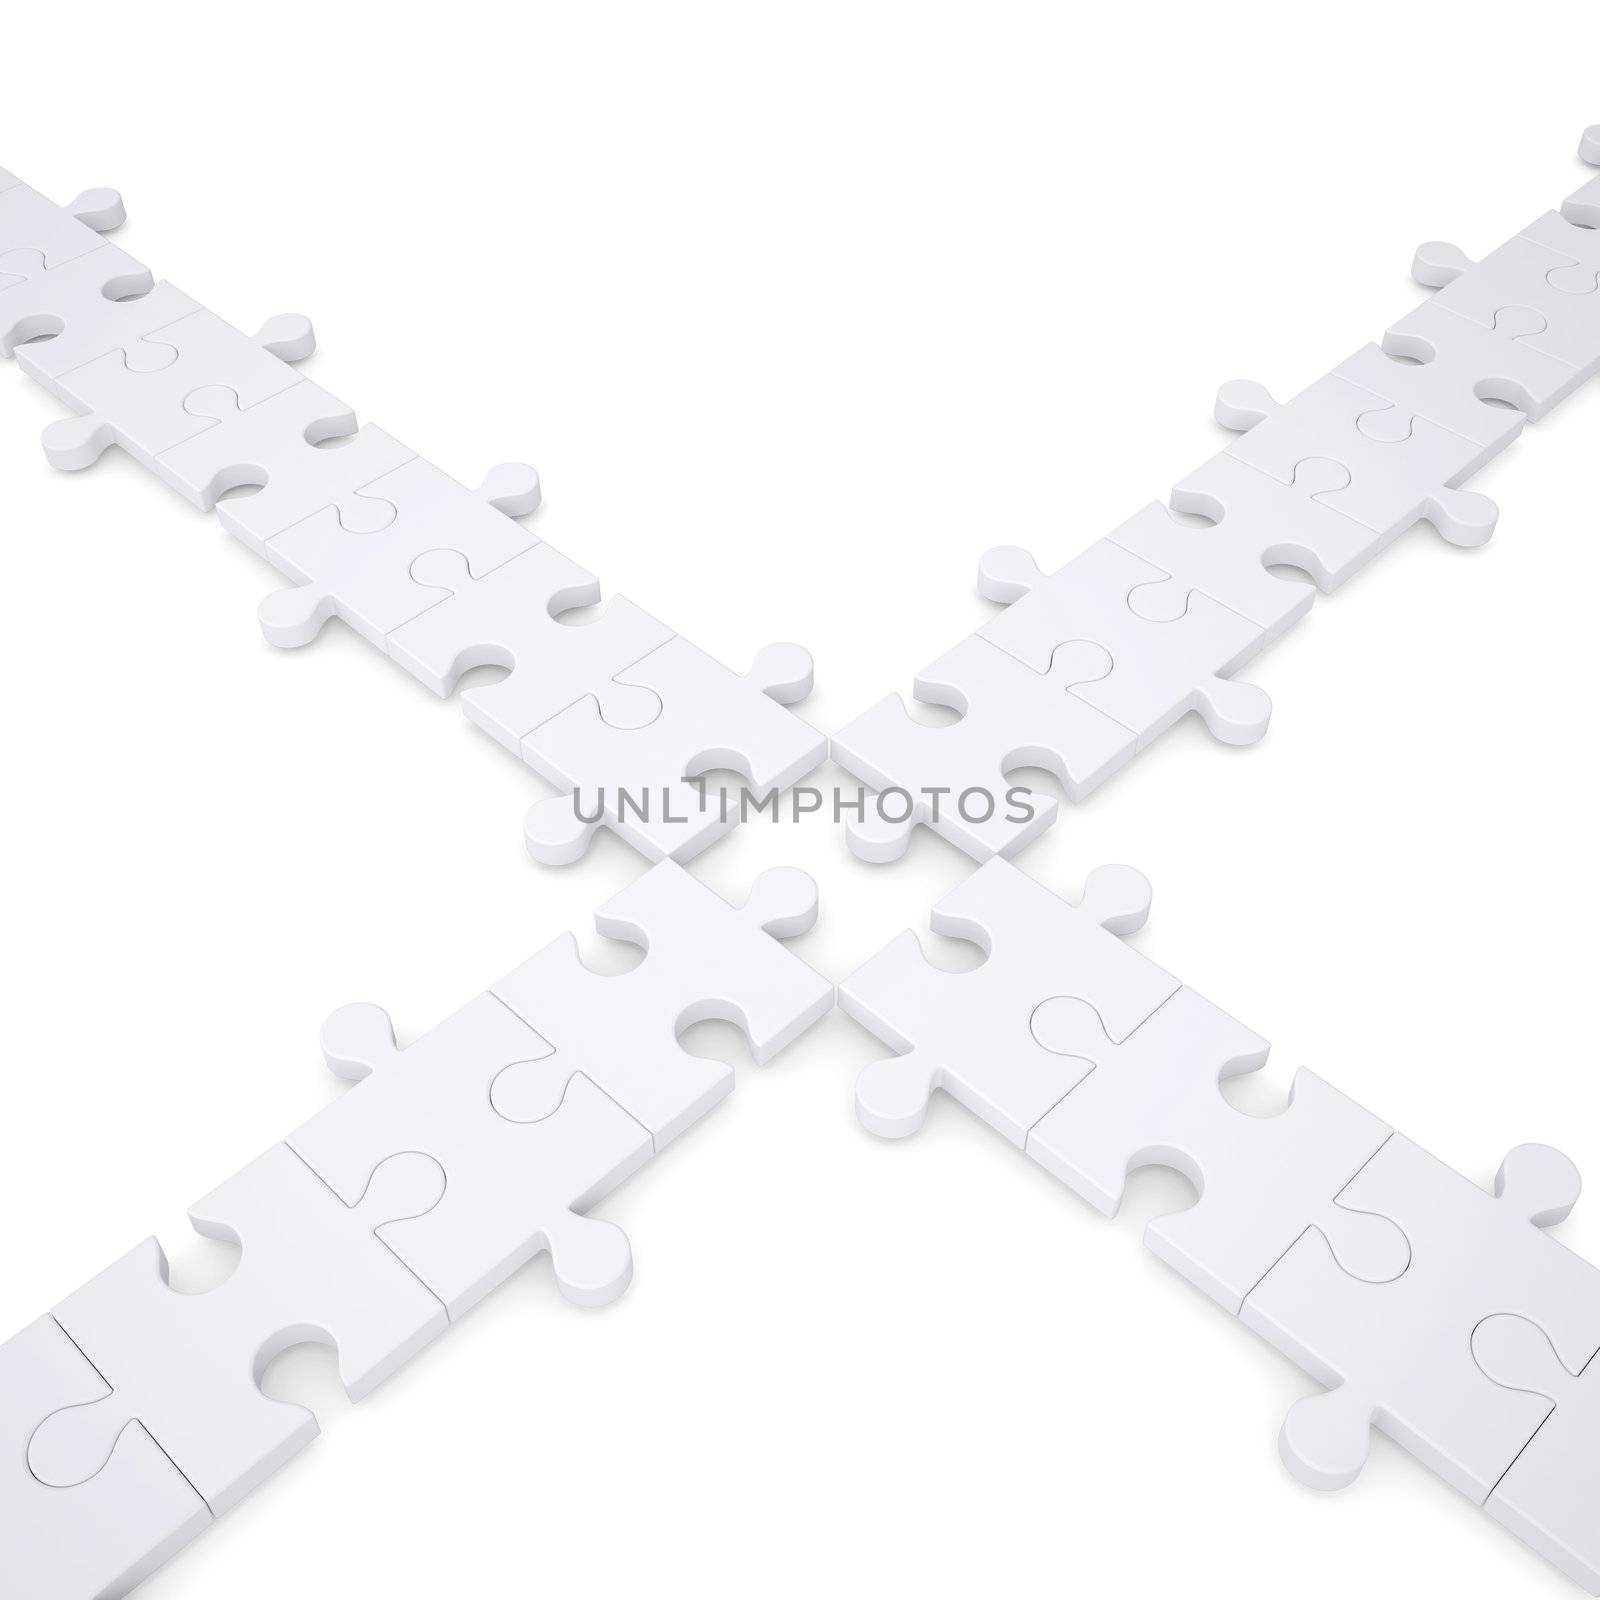 Puzzles are white. Isolated render on a white background